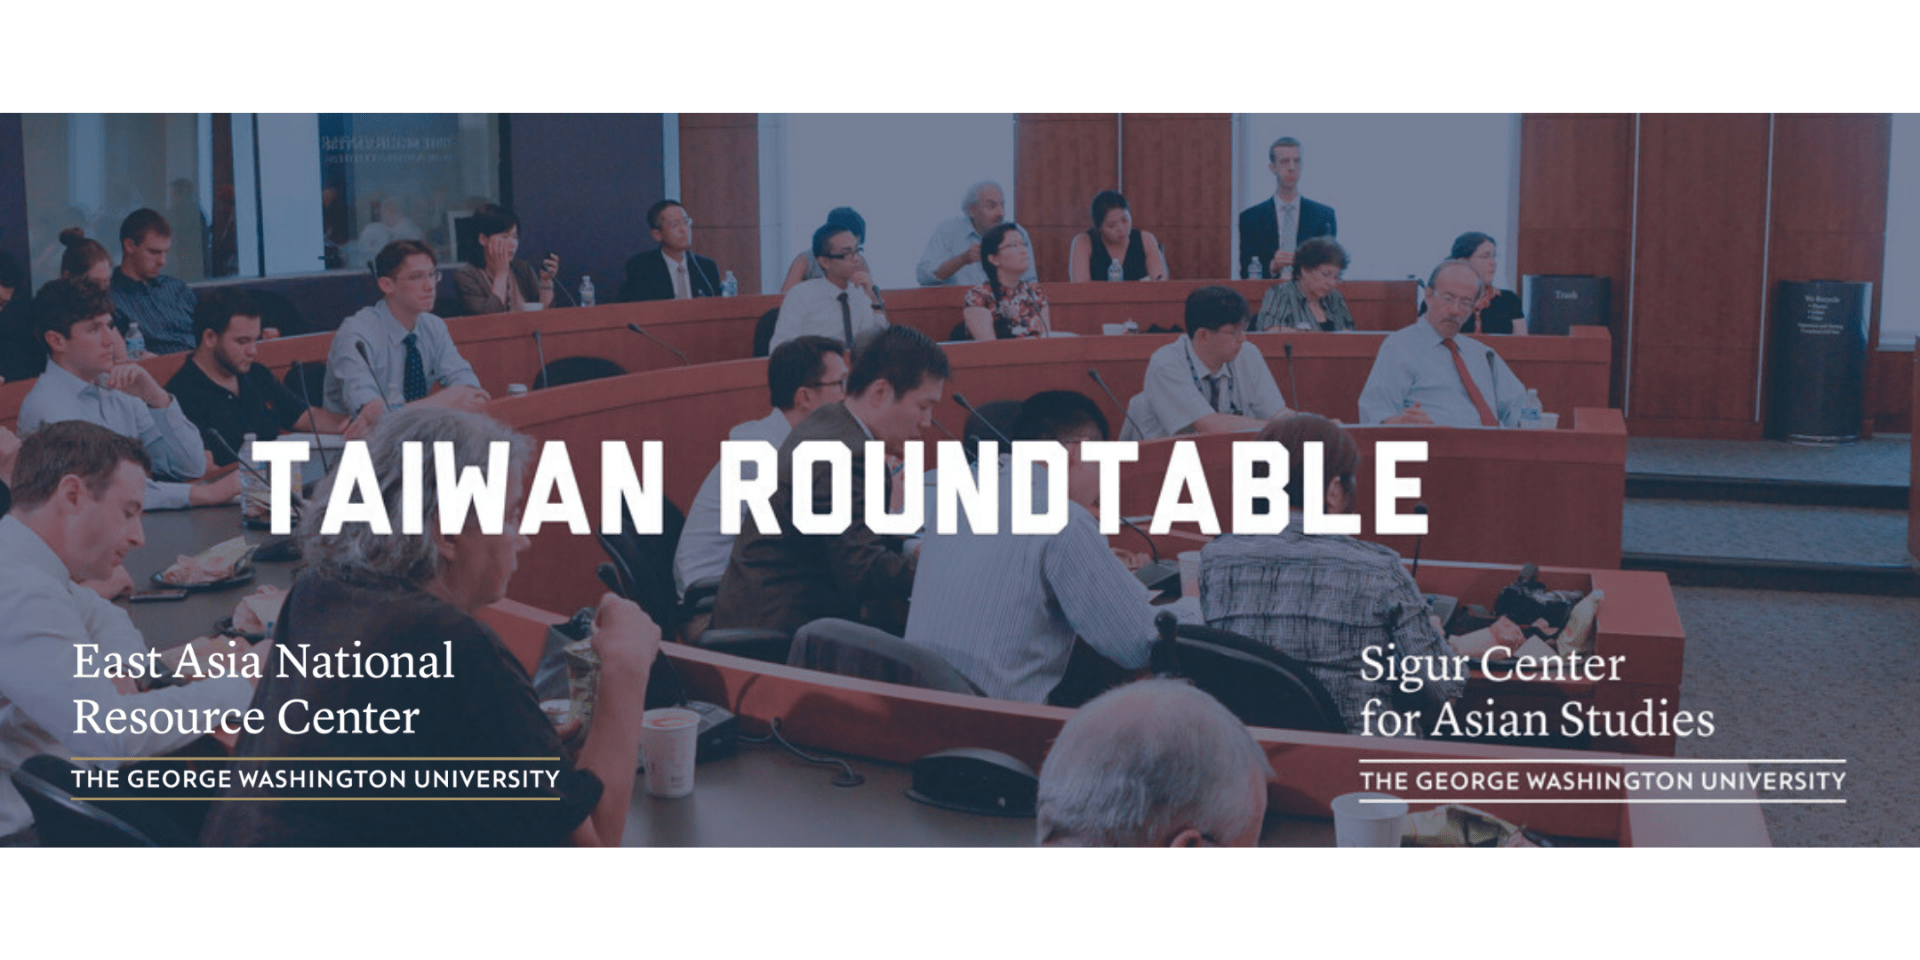 banner for taiwan roundtable event series with logos